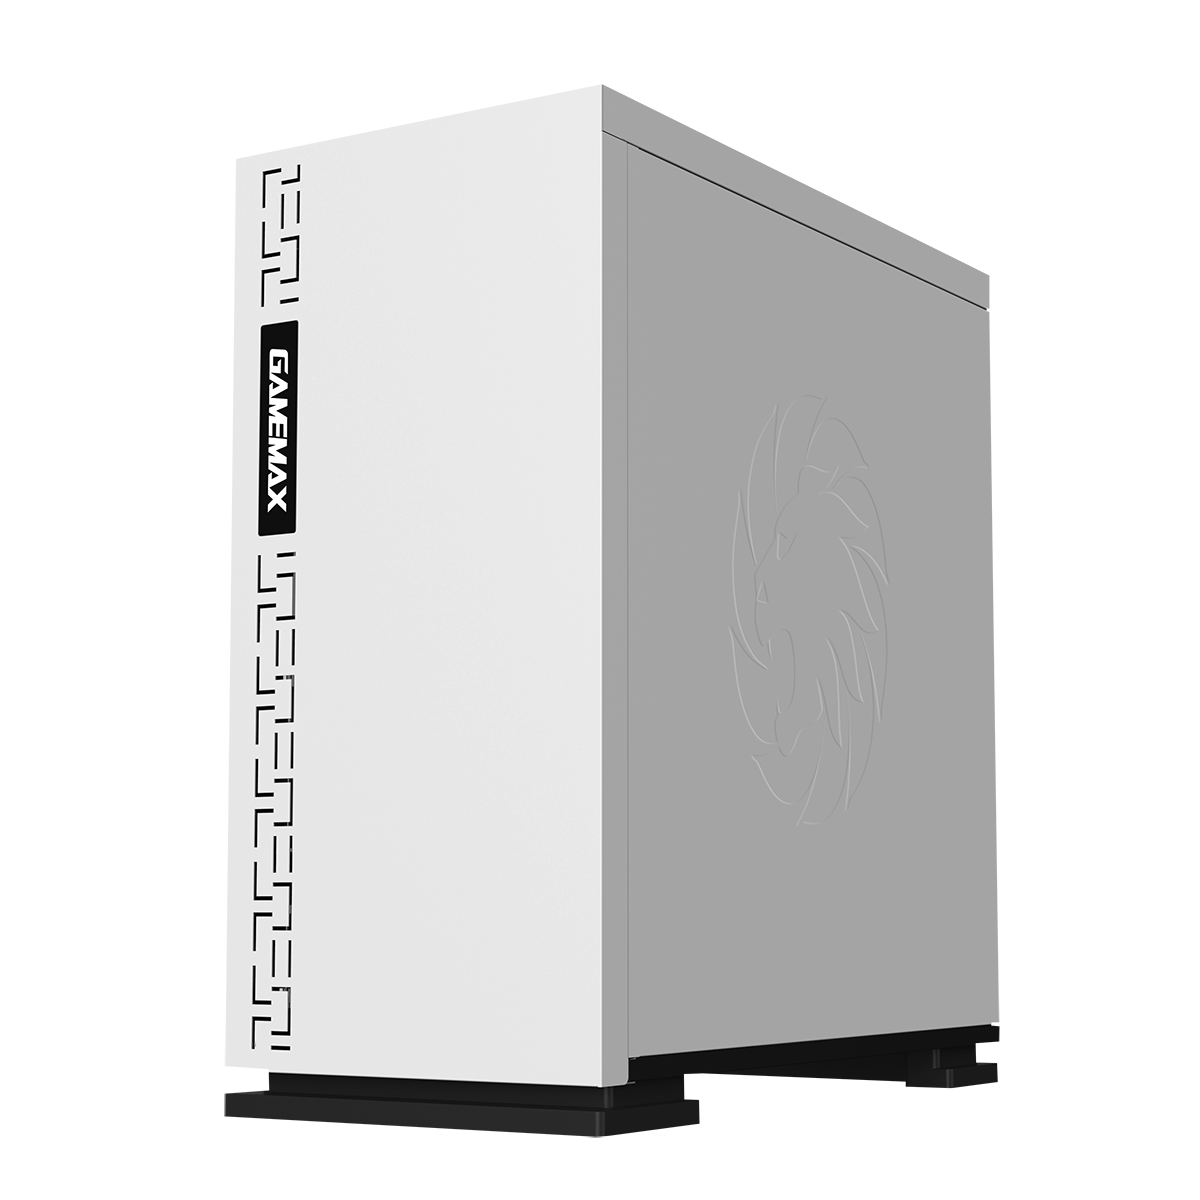 Gabinete Gamer Gamemax Expedition, Mid Tower, Com 1 Fan, mATX, Painel Lateral, White, Sem Fonte